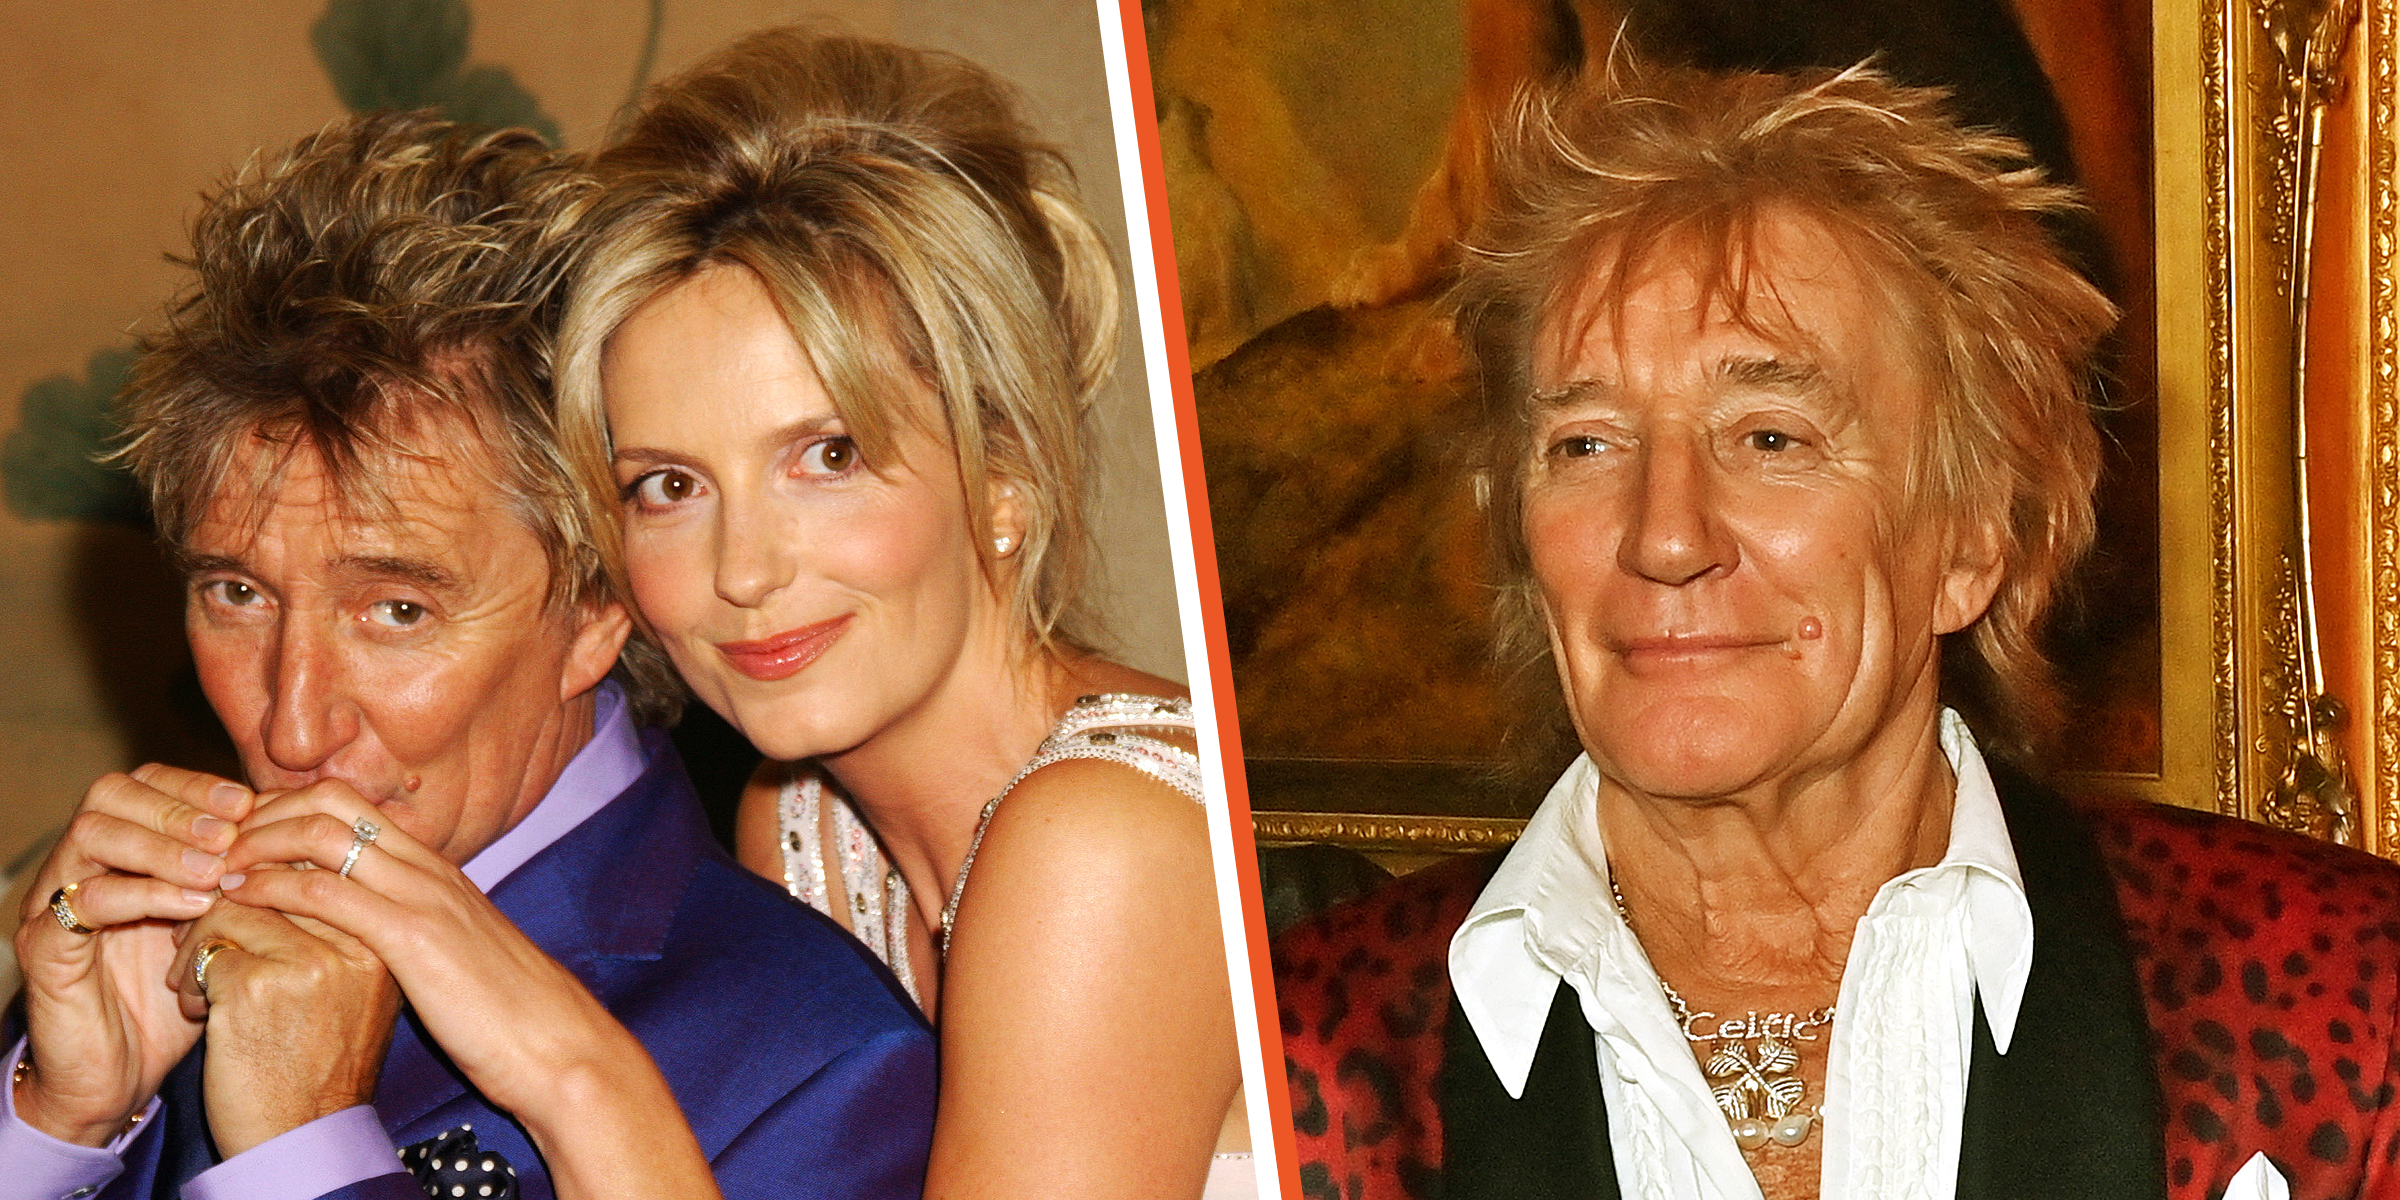 Rod Stewart and Penny Lancaster | Rod Stewart | Source: Getty Images